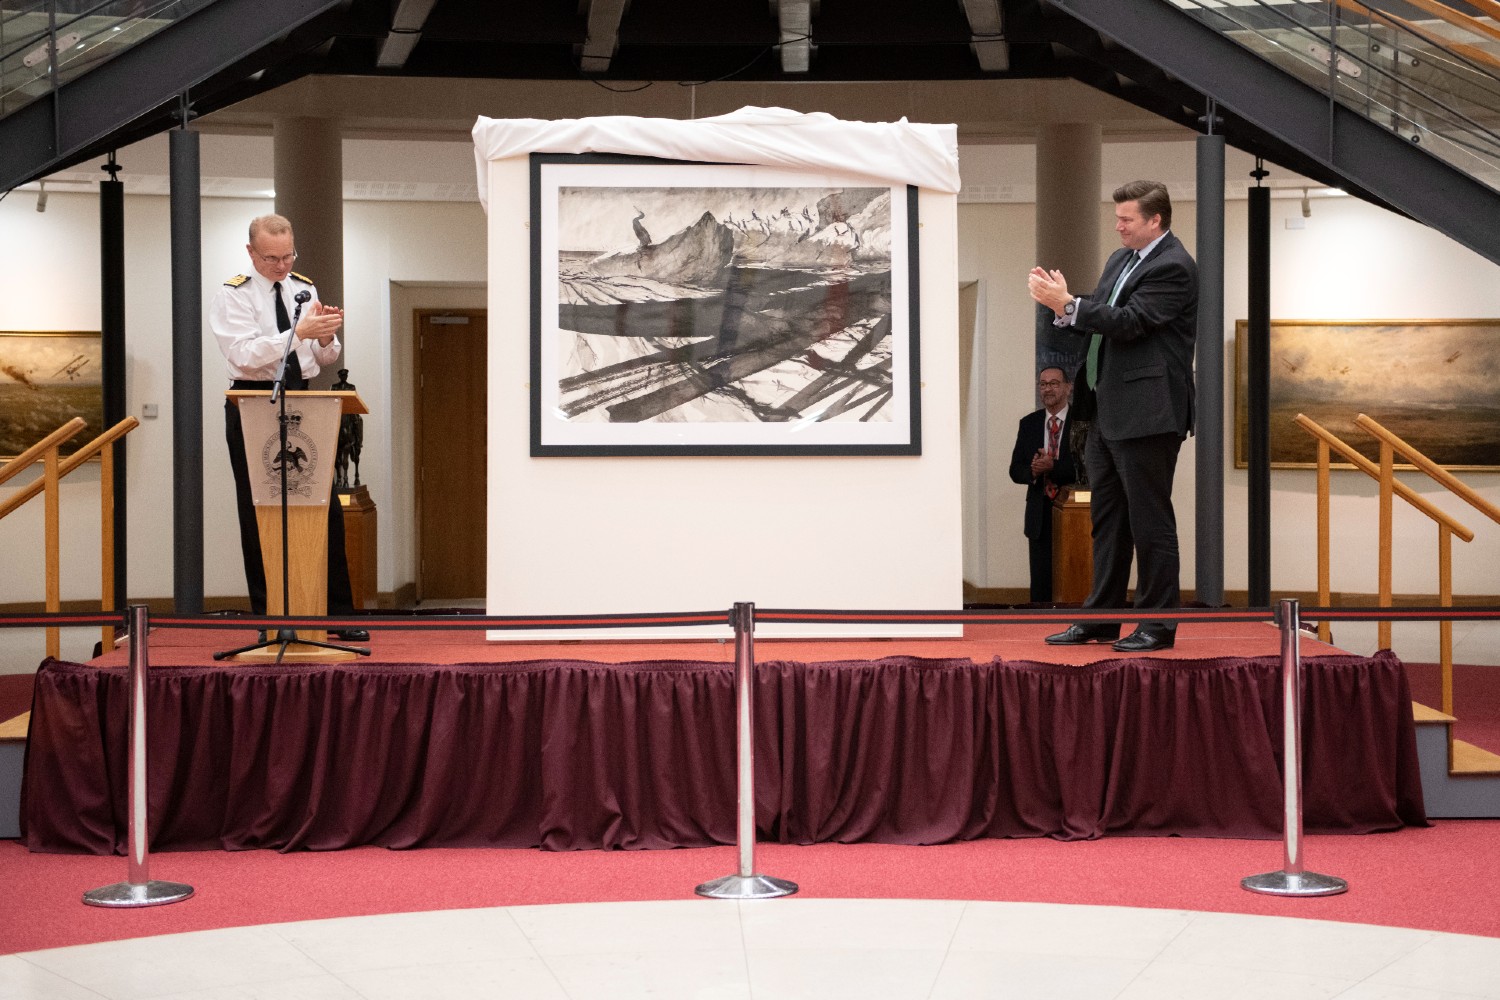 A navy officer and Minister for the Armed Forces unveiling an artwork depicting the Cormorant bird.